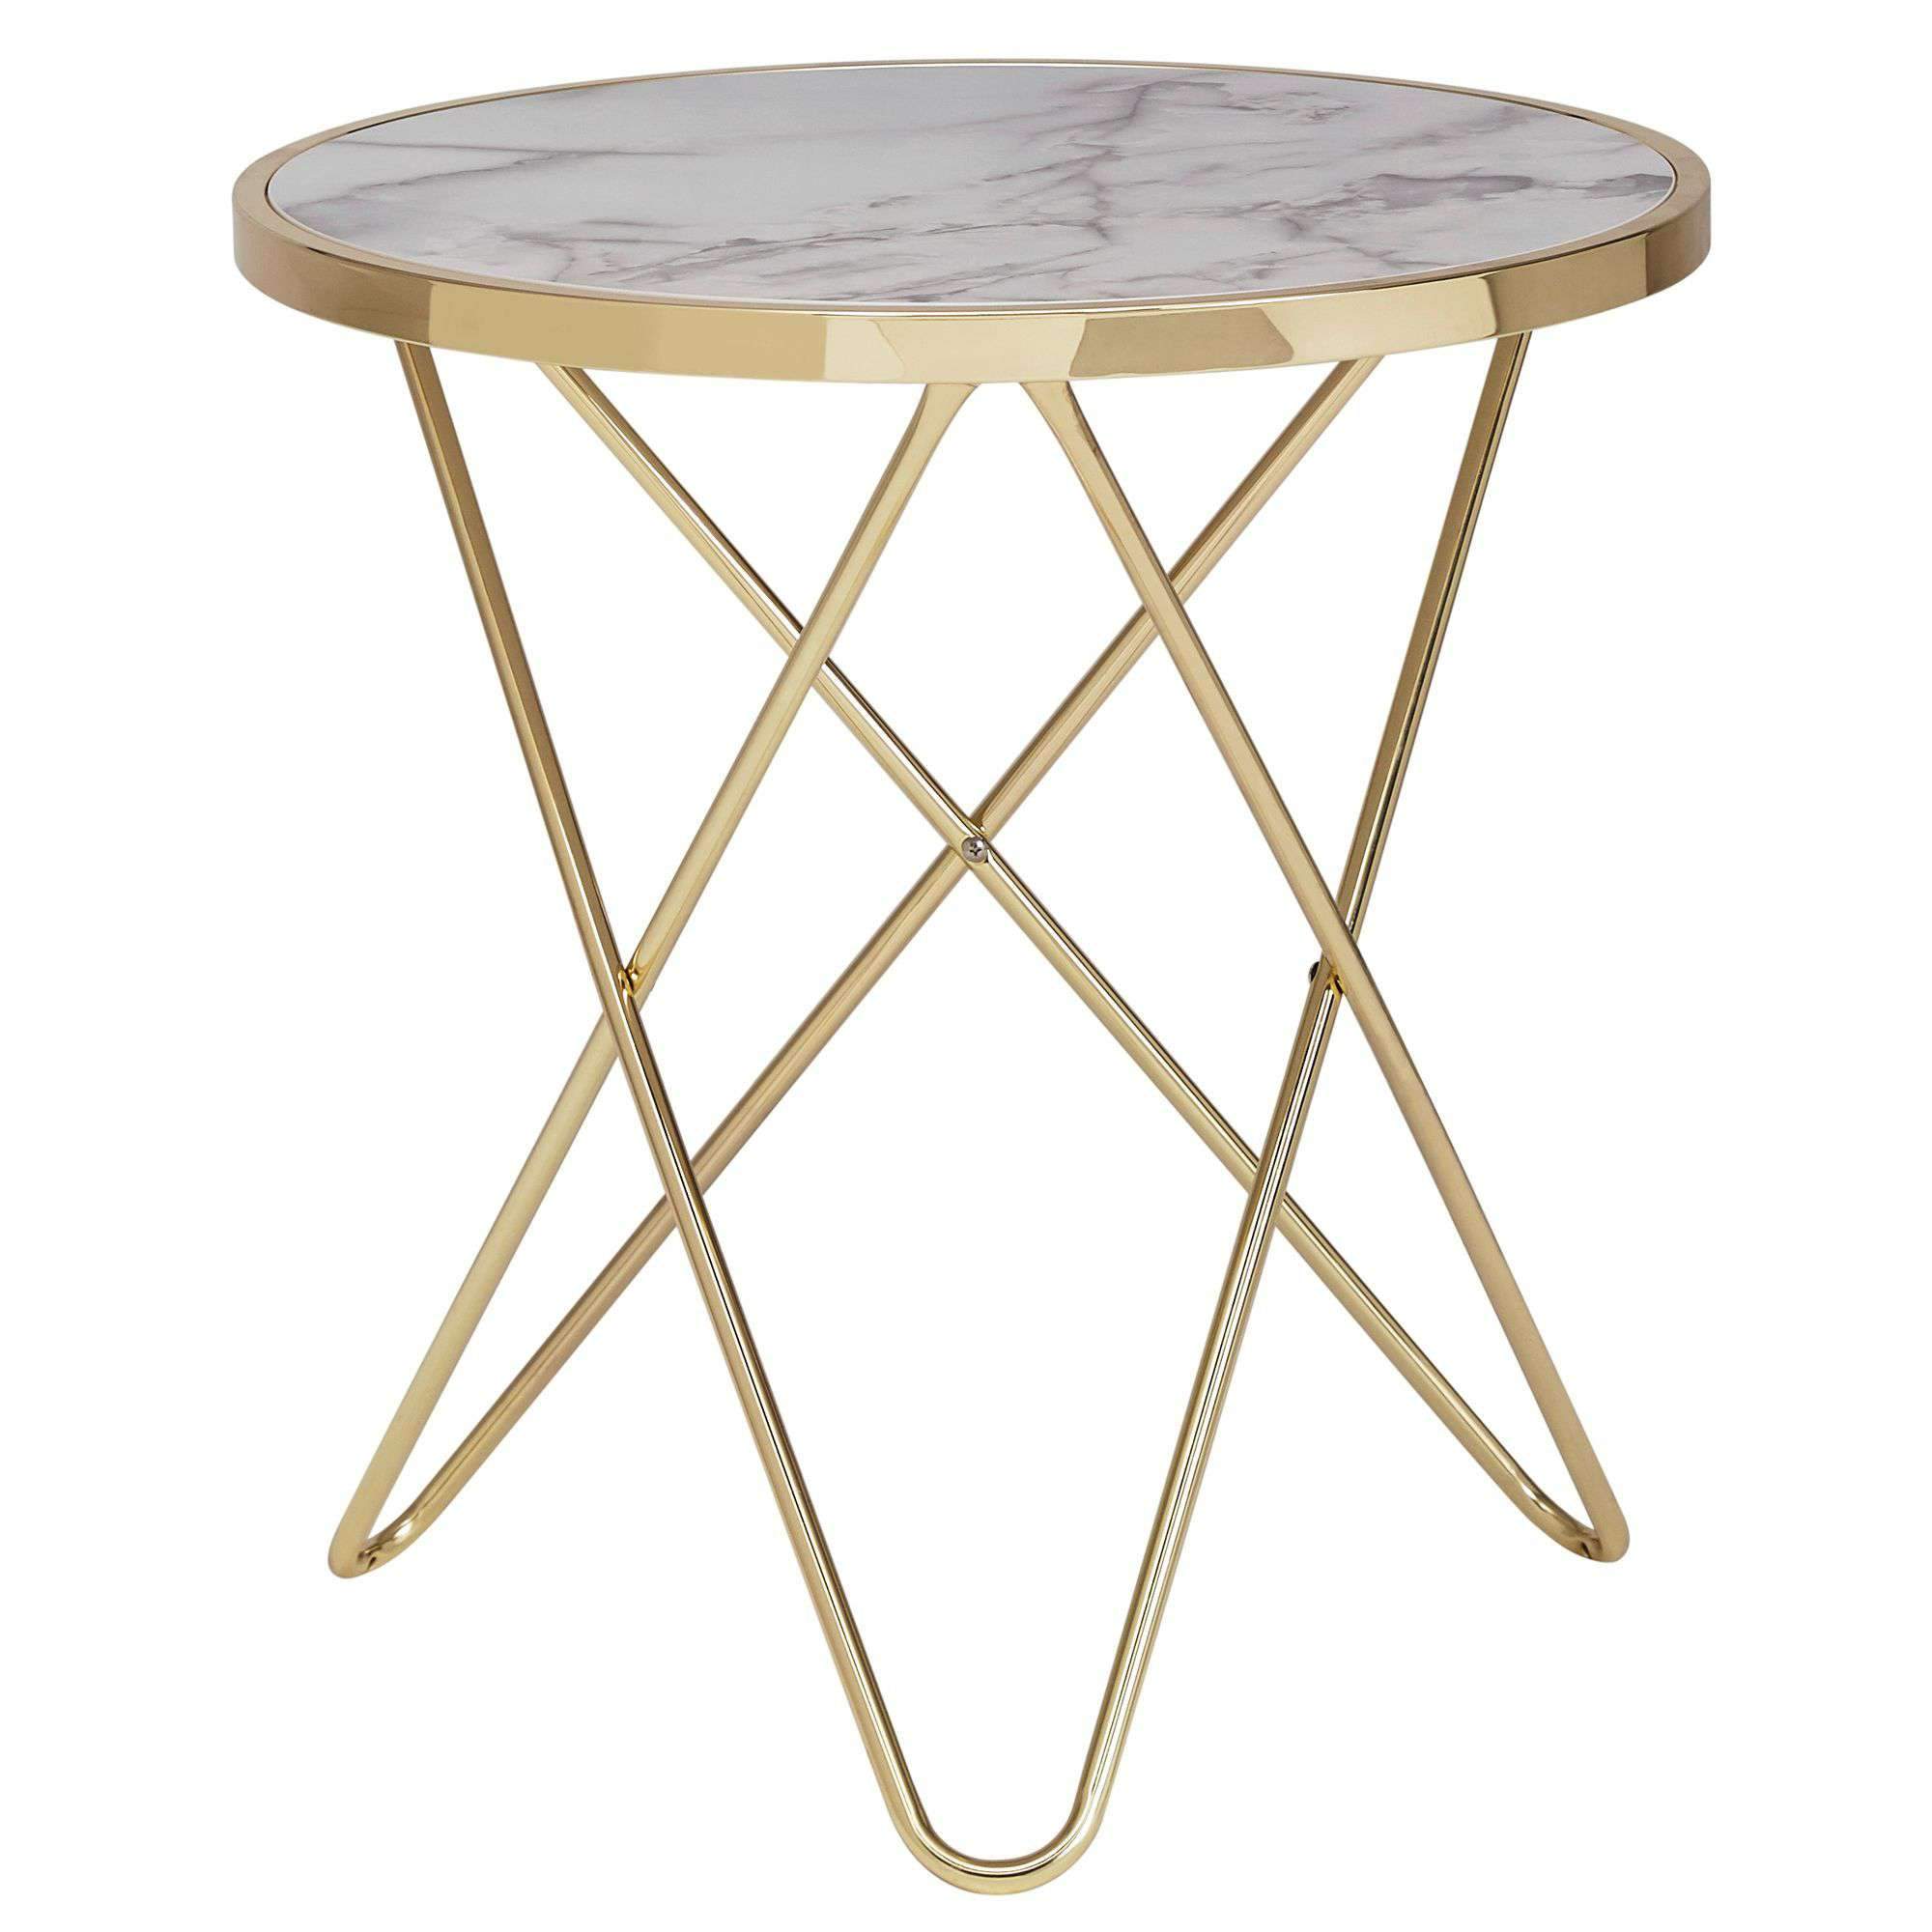 Nancy's side table marble - Side tables design - Metal - White - 55 x 57 x 55 cm